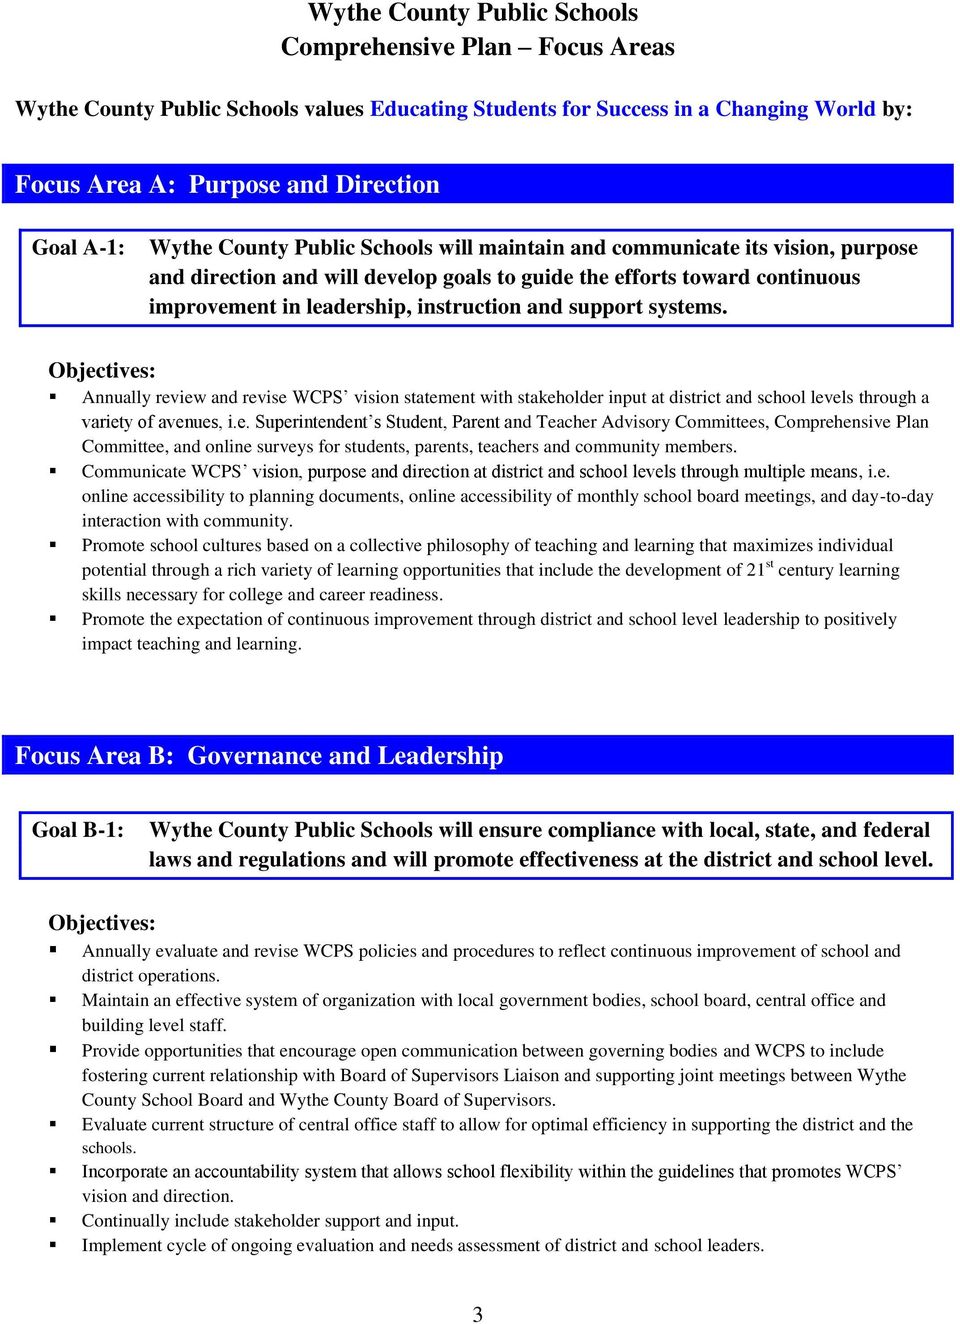 improvement in leadership, instruction and support systems. Annually review and revise WCPS vision statement with stakeholder input at district and school levels through a variety of avenues, i.e. Superintendent s Student, Parent and Teacher Advisory Committees, Comprehensive Plan Committee, and online surveys for students, parents, teachers and community members.